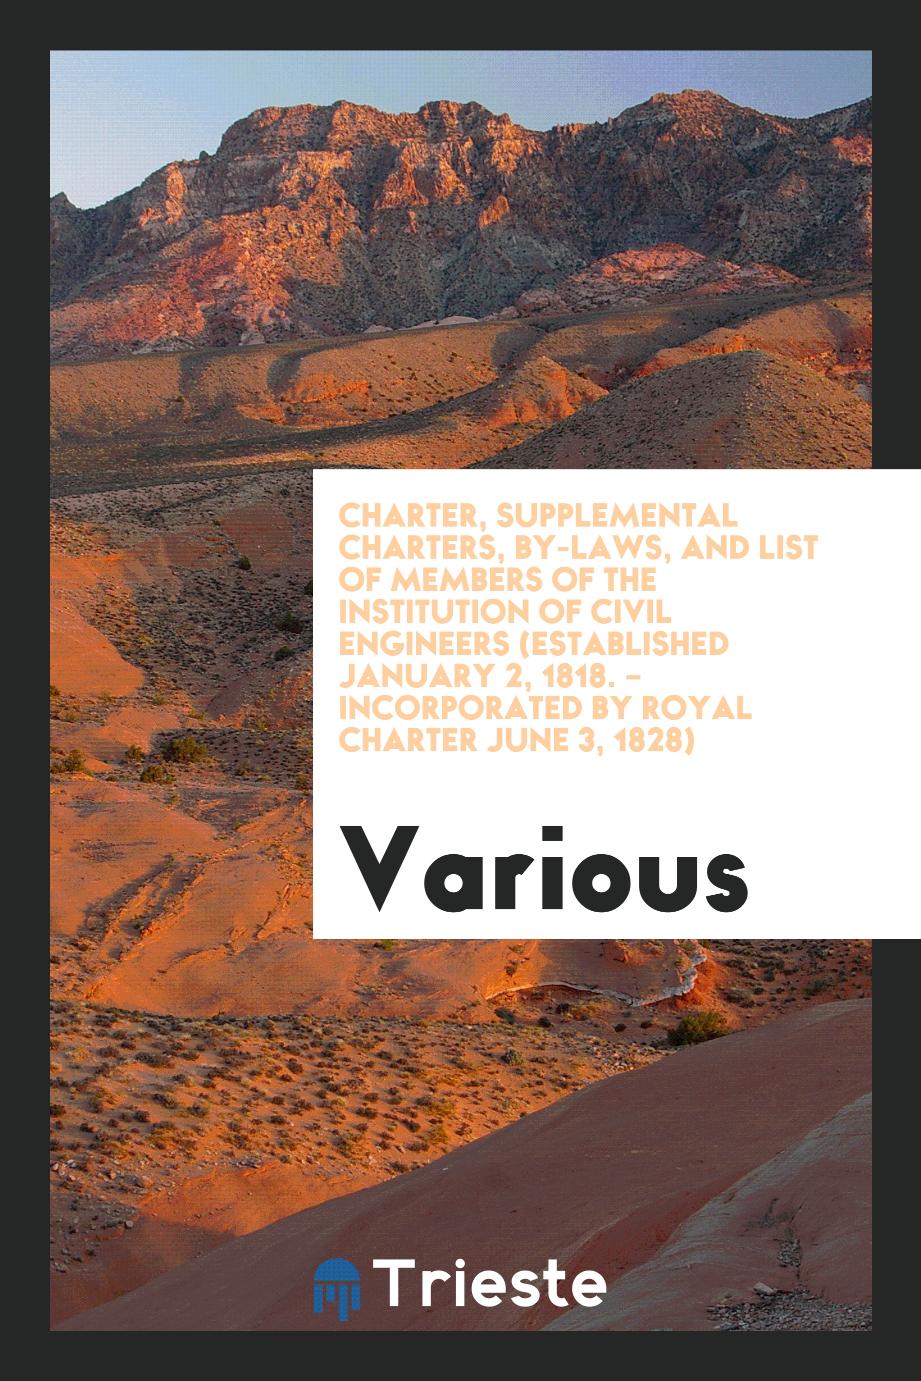 Charter, Supplemental Charters, By-Laws, and List of Members of the Institution of Civil Engineers (Established January 2, 1818. – Incorporated by Royal Charter June 3, 1828)